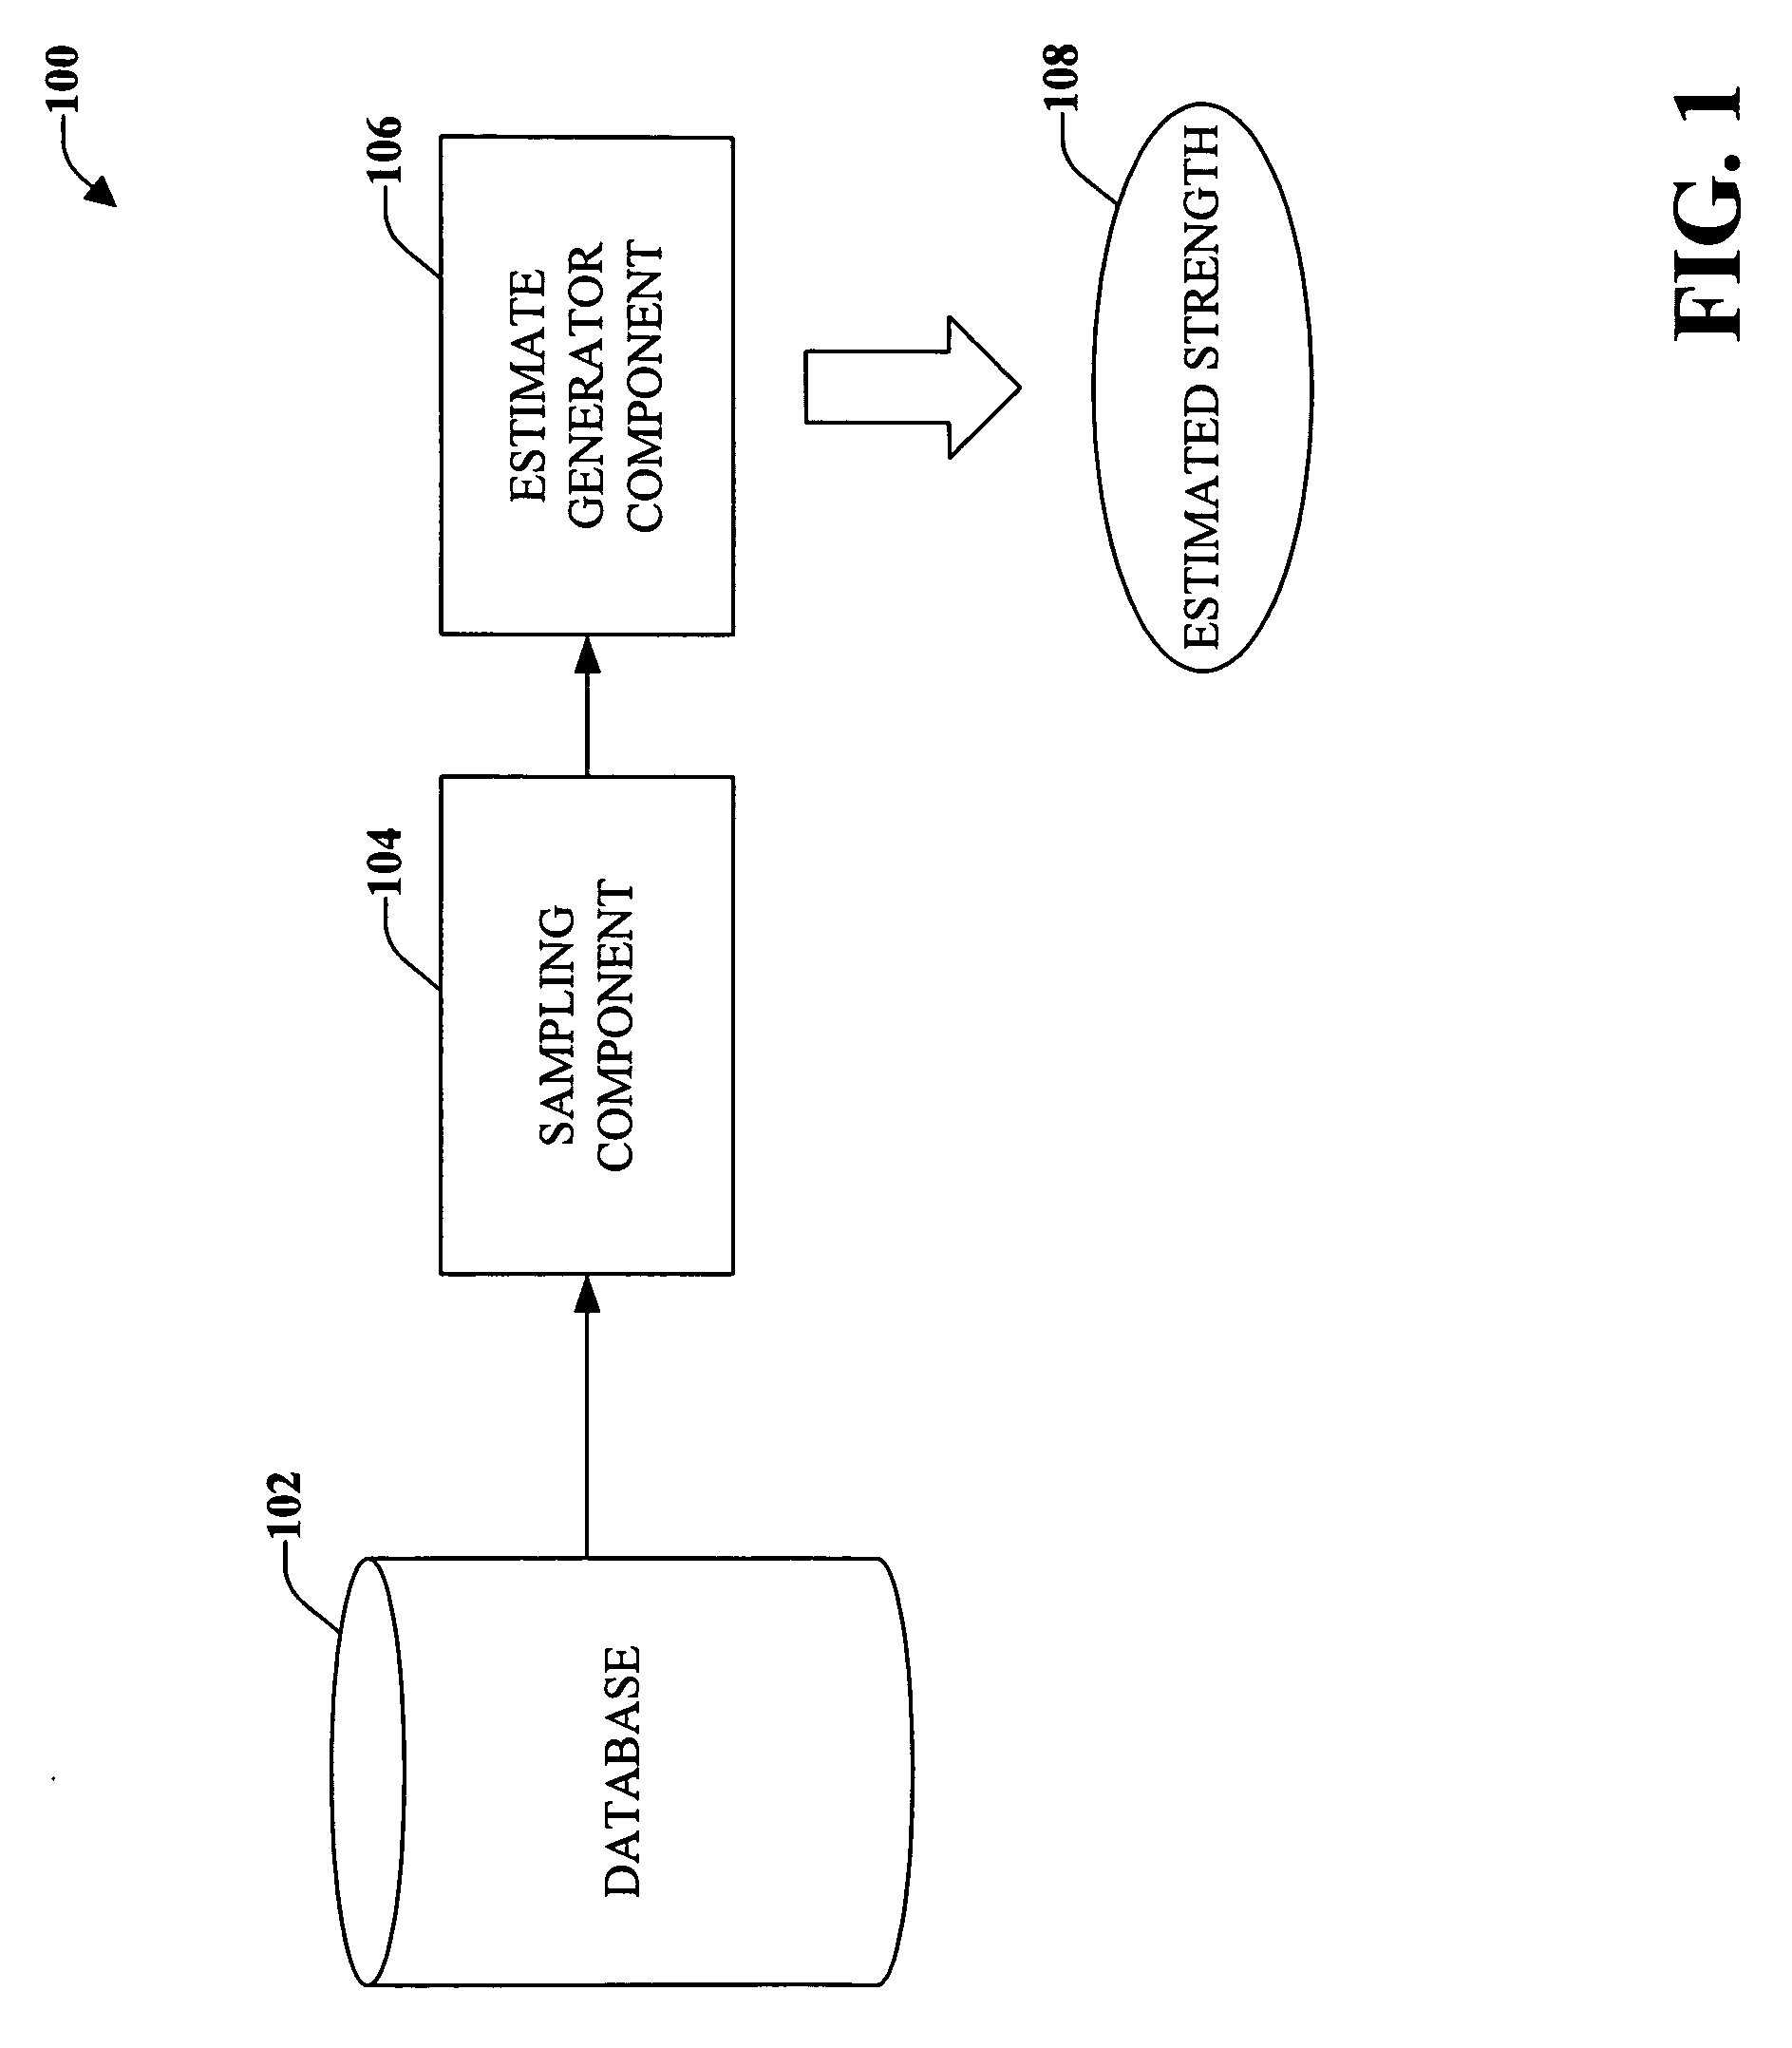 Systems and methods for estimating functional relationships in a database